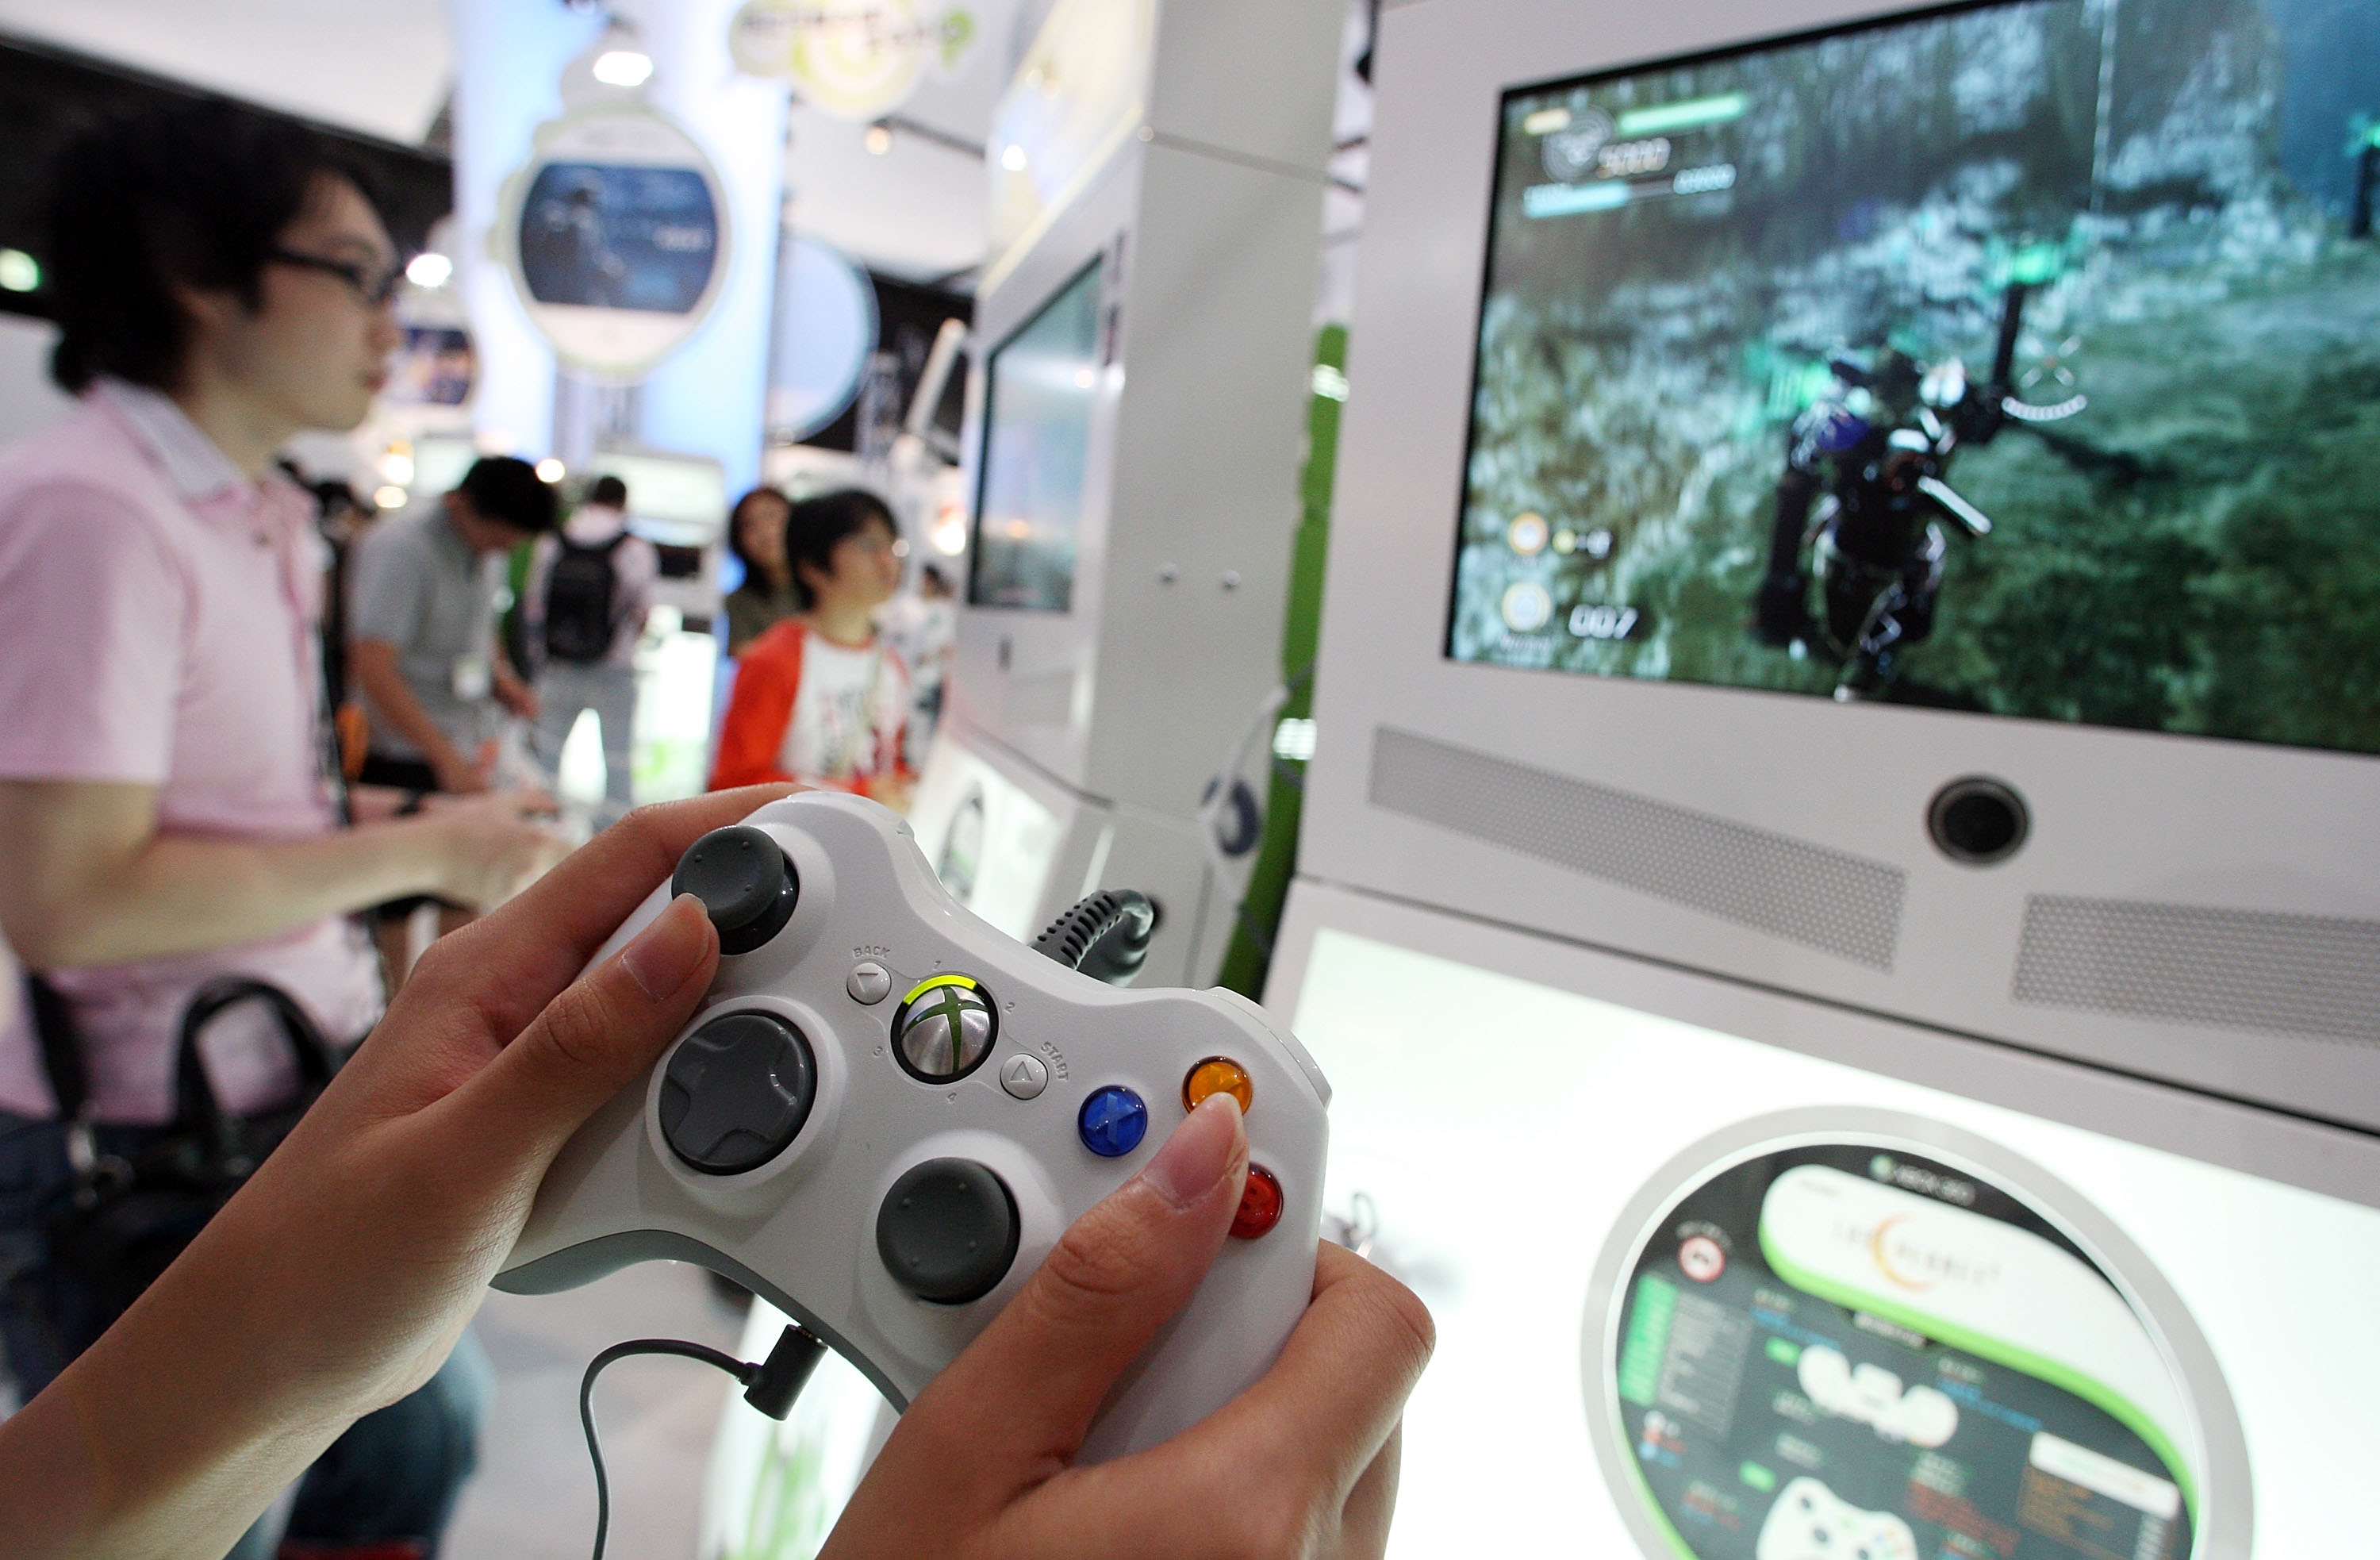 Visitors play with the XBOX 360 at the Microsoft booth during the Tokyo Game Show 2009 press and business day at Makuhari Messe on September 24, 2009 in Chiba, Japan. (Junko Kimura&mdash;Getty Images)